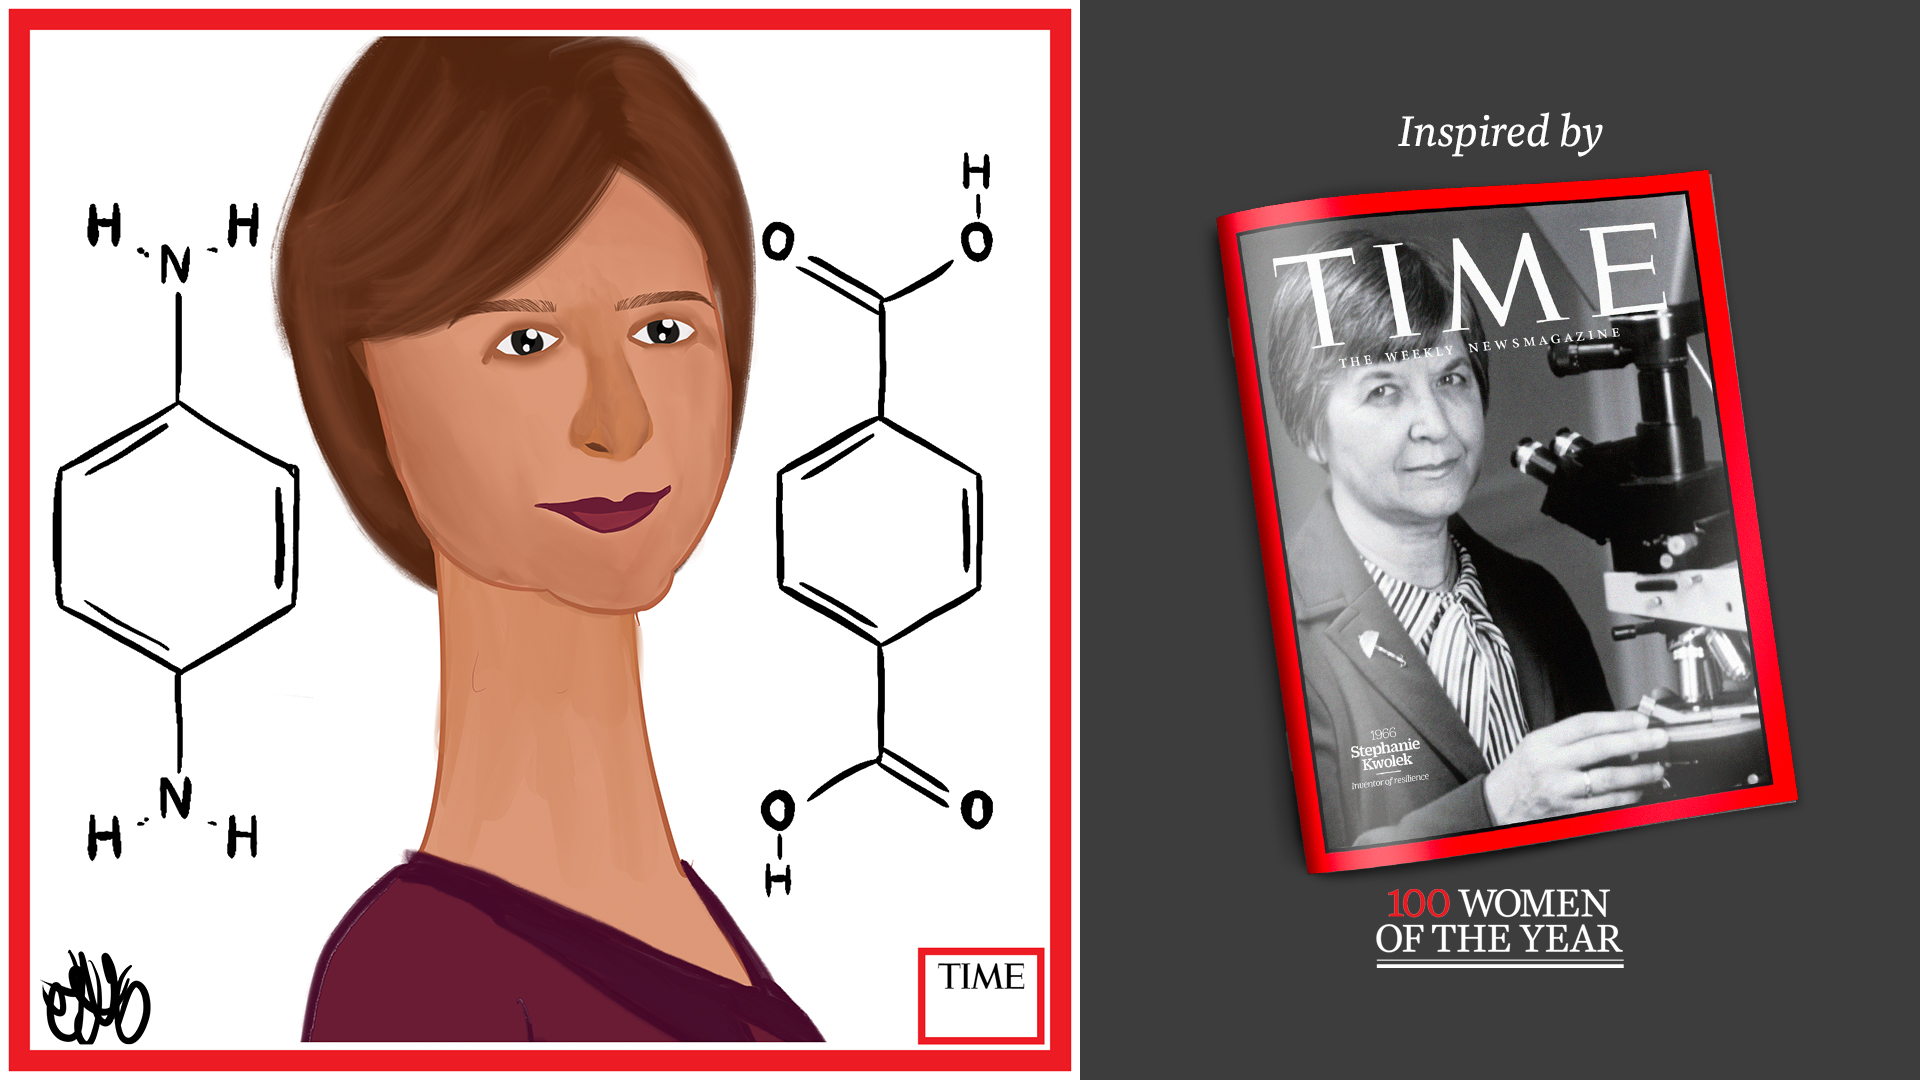 Left: Stephanie Kwolek by Nyla Hayes (red border, custom background) Right: TIME Cover 1966